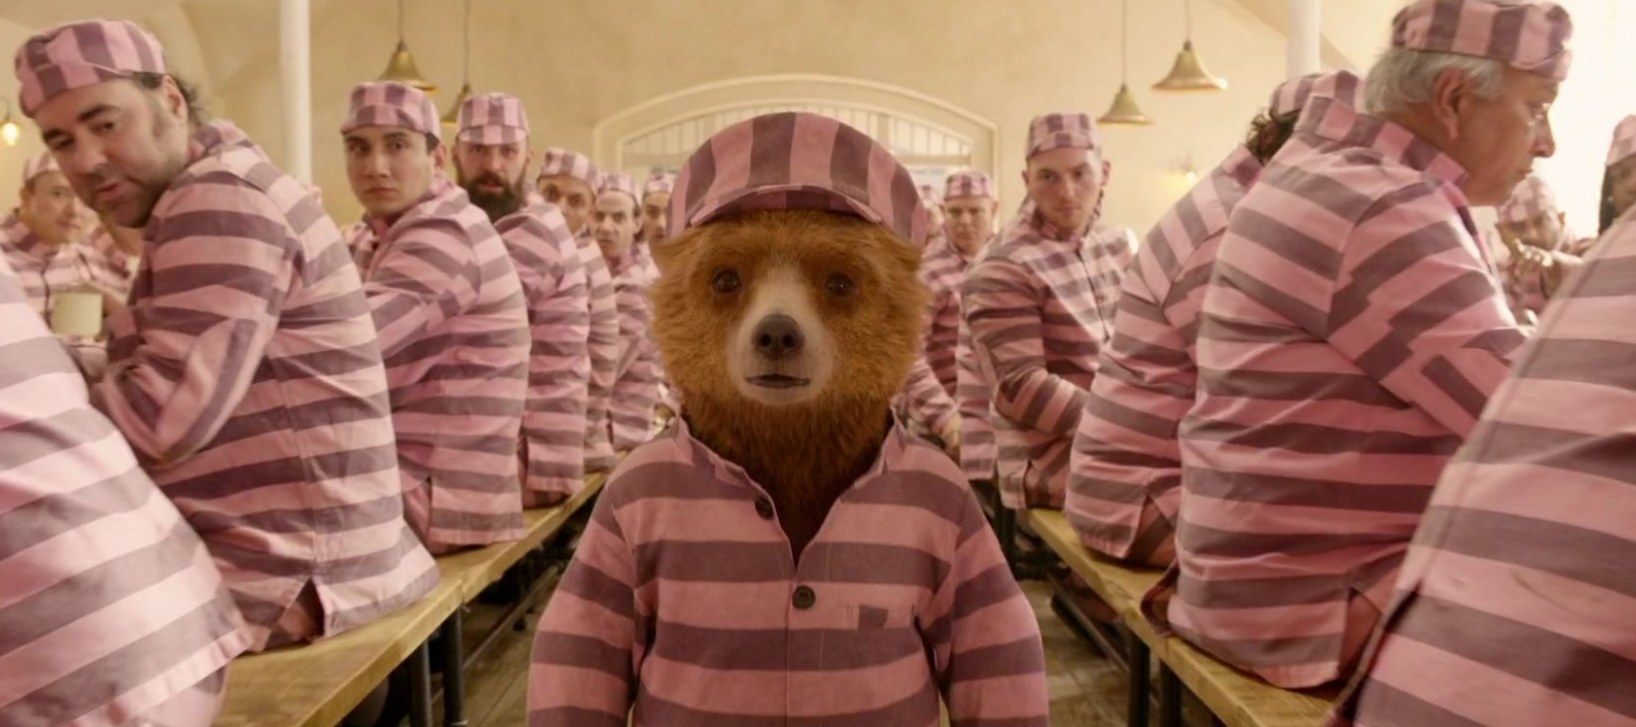 Paddington stands between two rows of seated prisoners; they are all wearing pink striped prison uniforms